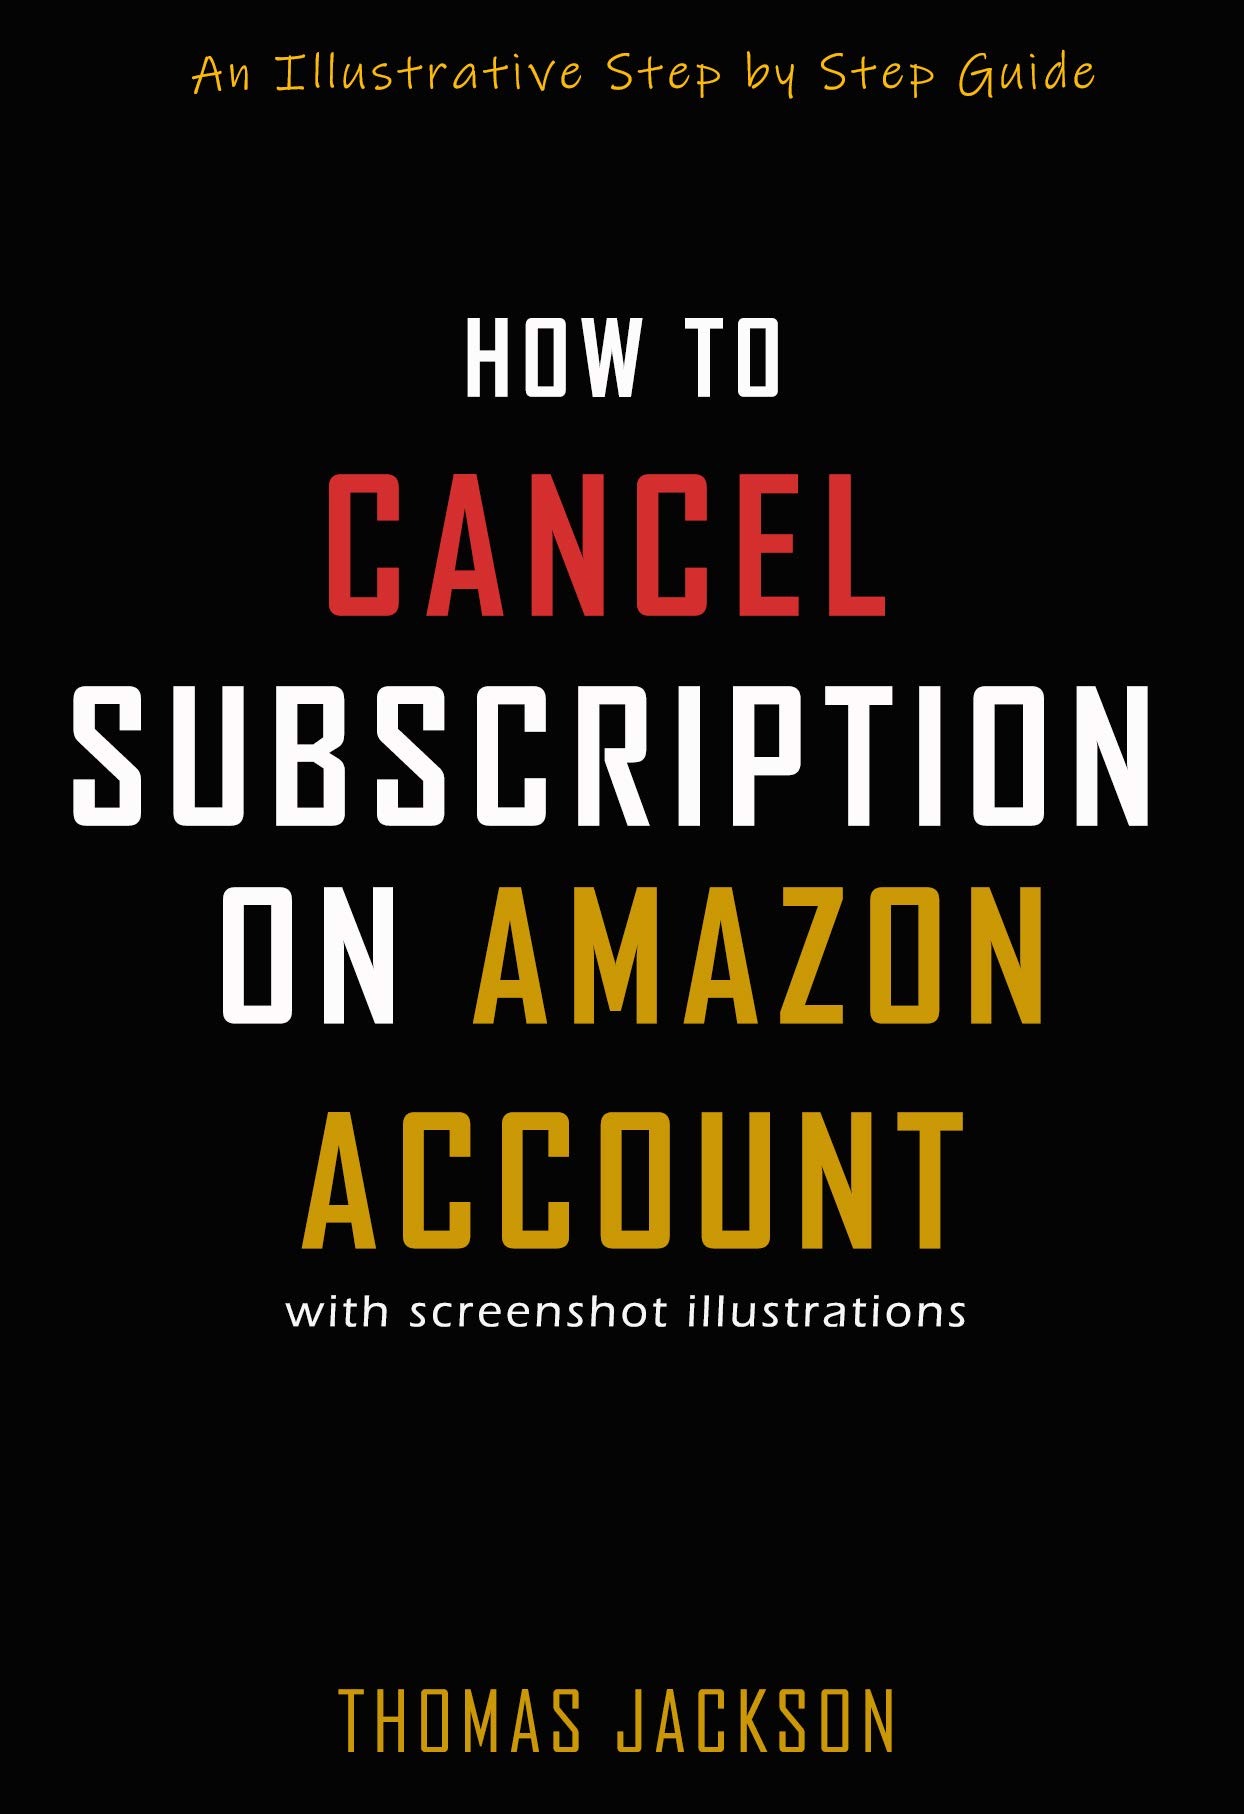 HOW TO CANCEL SUBSCRIPTION ON AMAZON ACCOUNT: An Illustrative Step by Step Guide (Quick Guides Book 2)